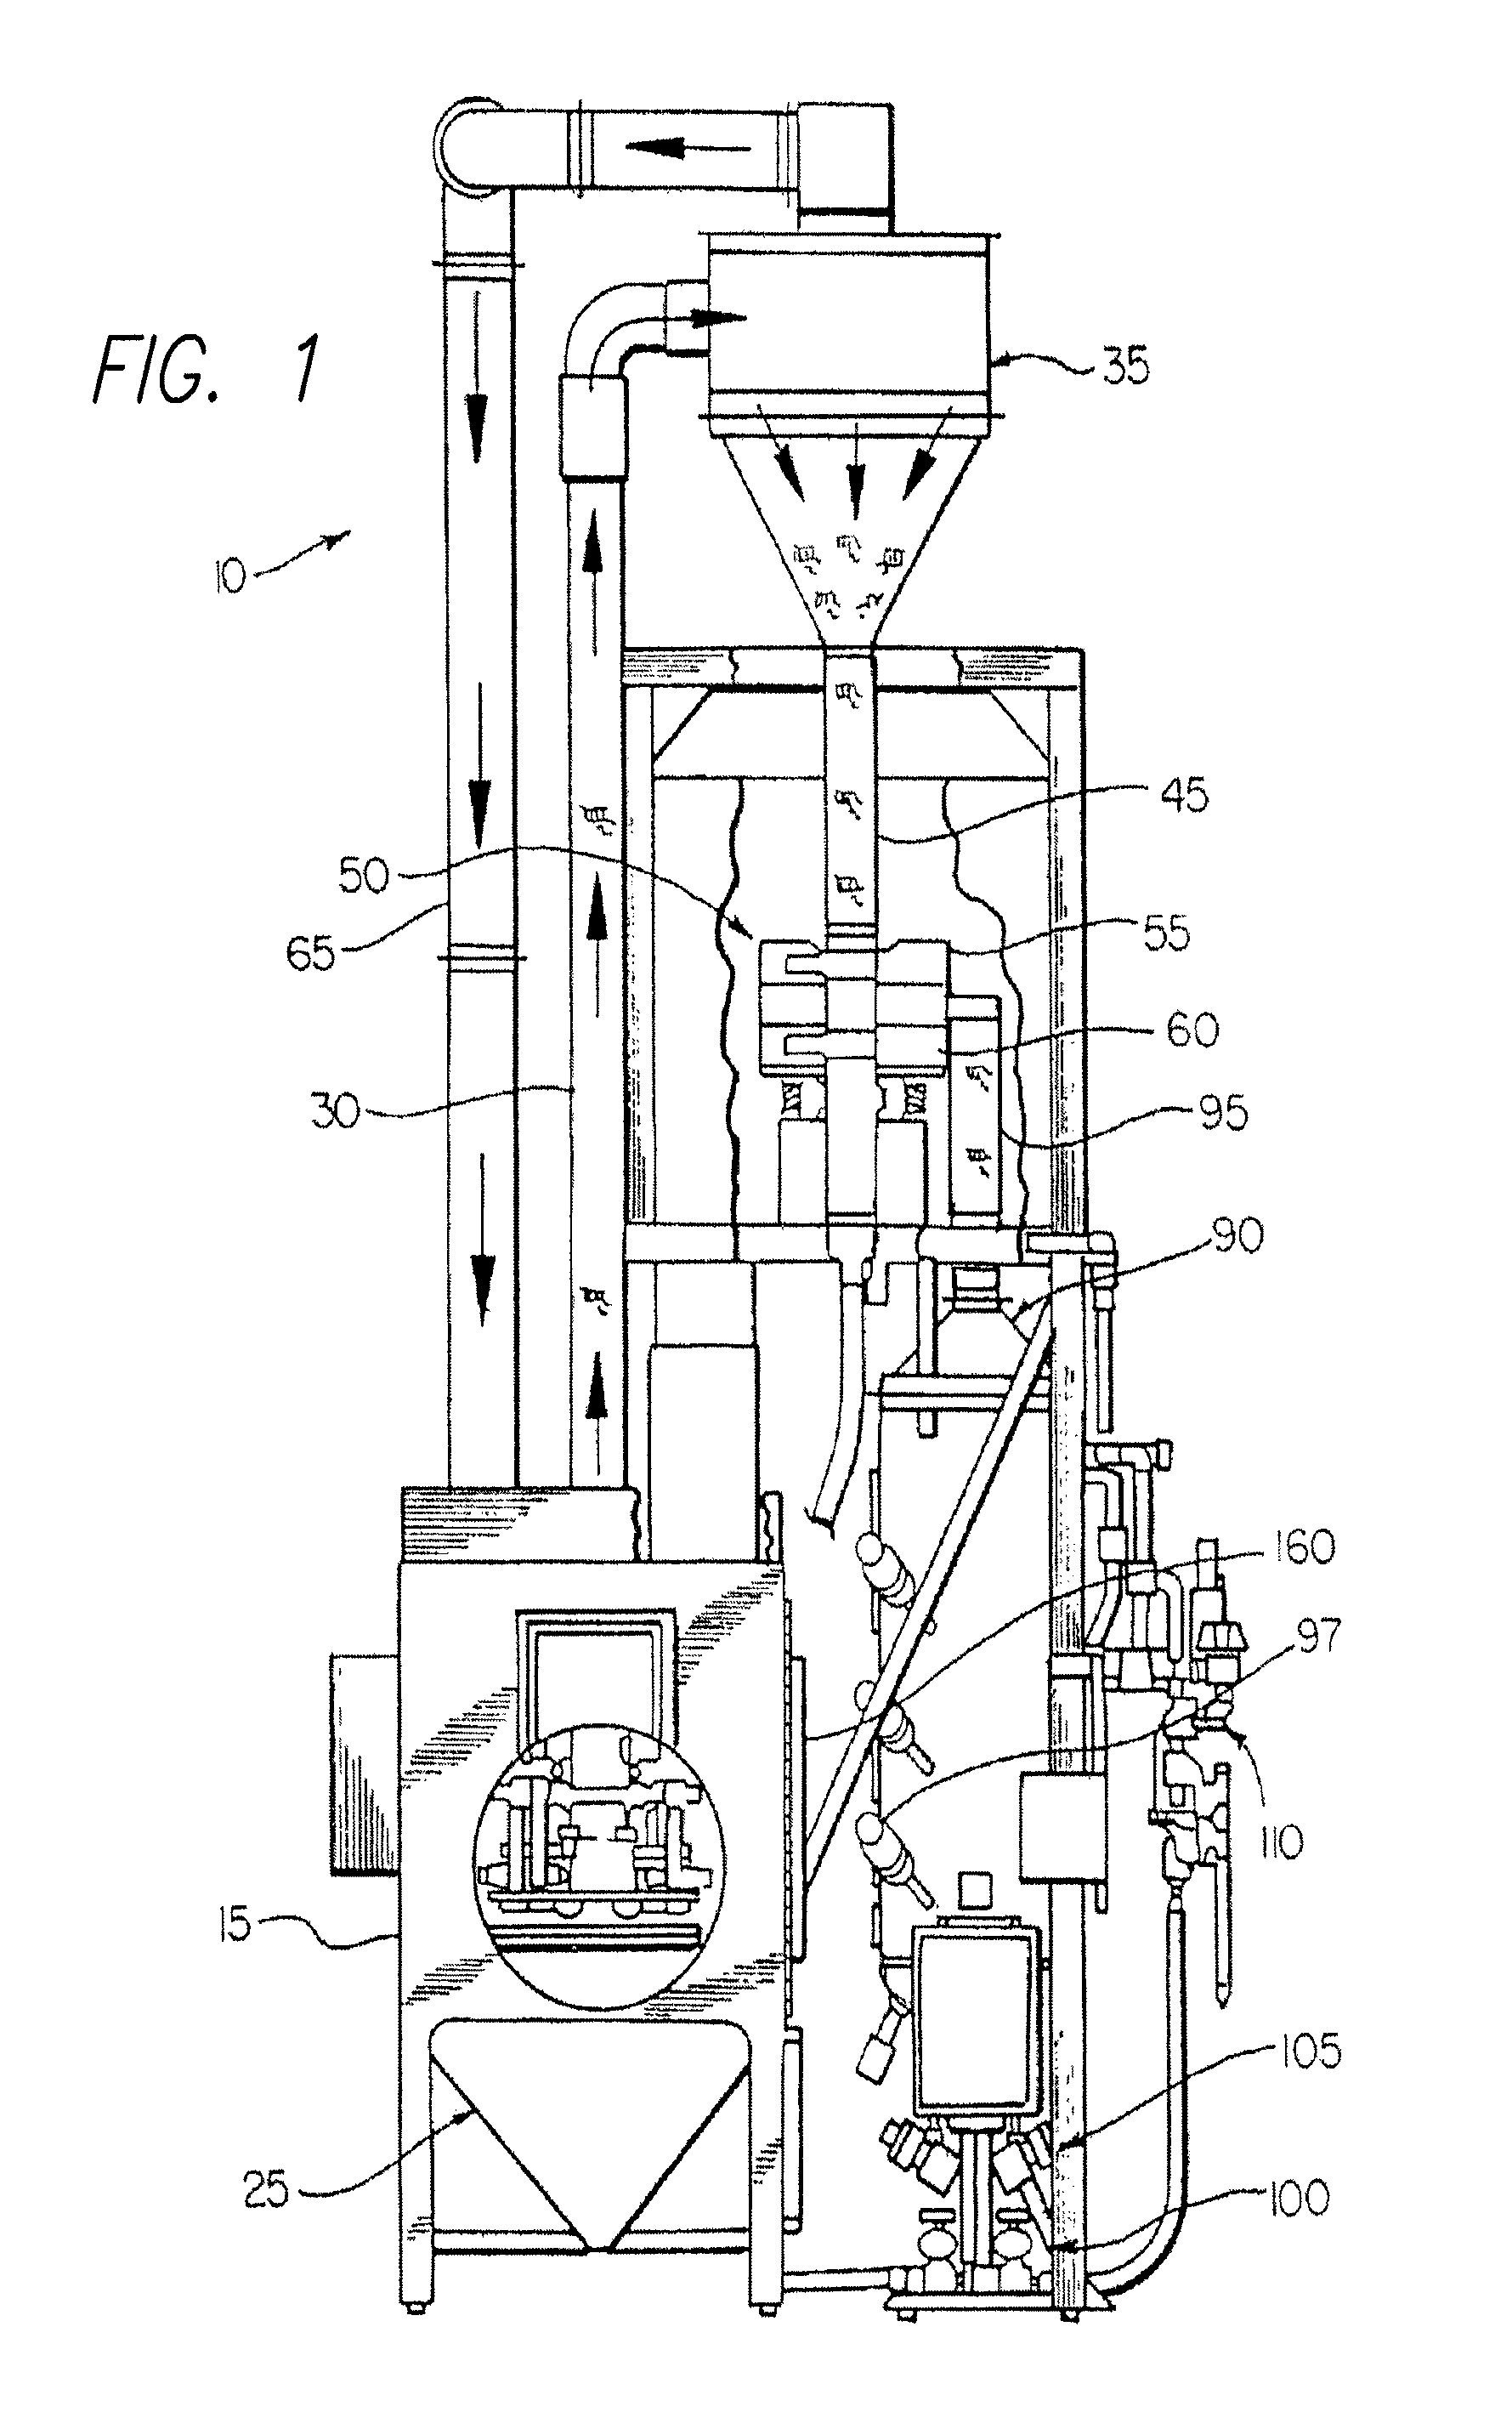 Machining system, apparatus and method